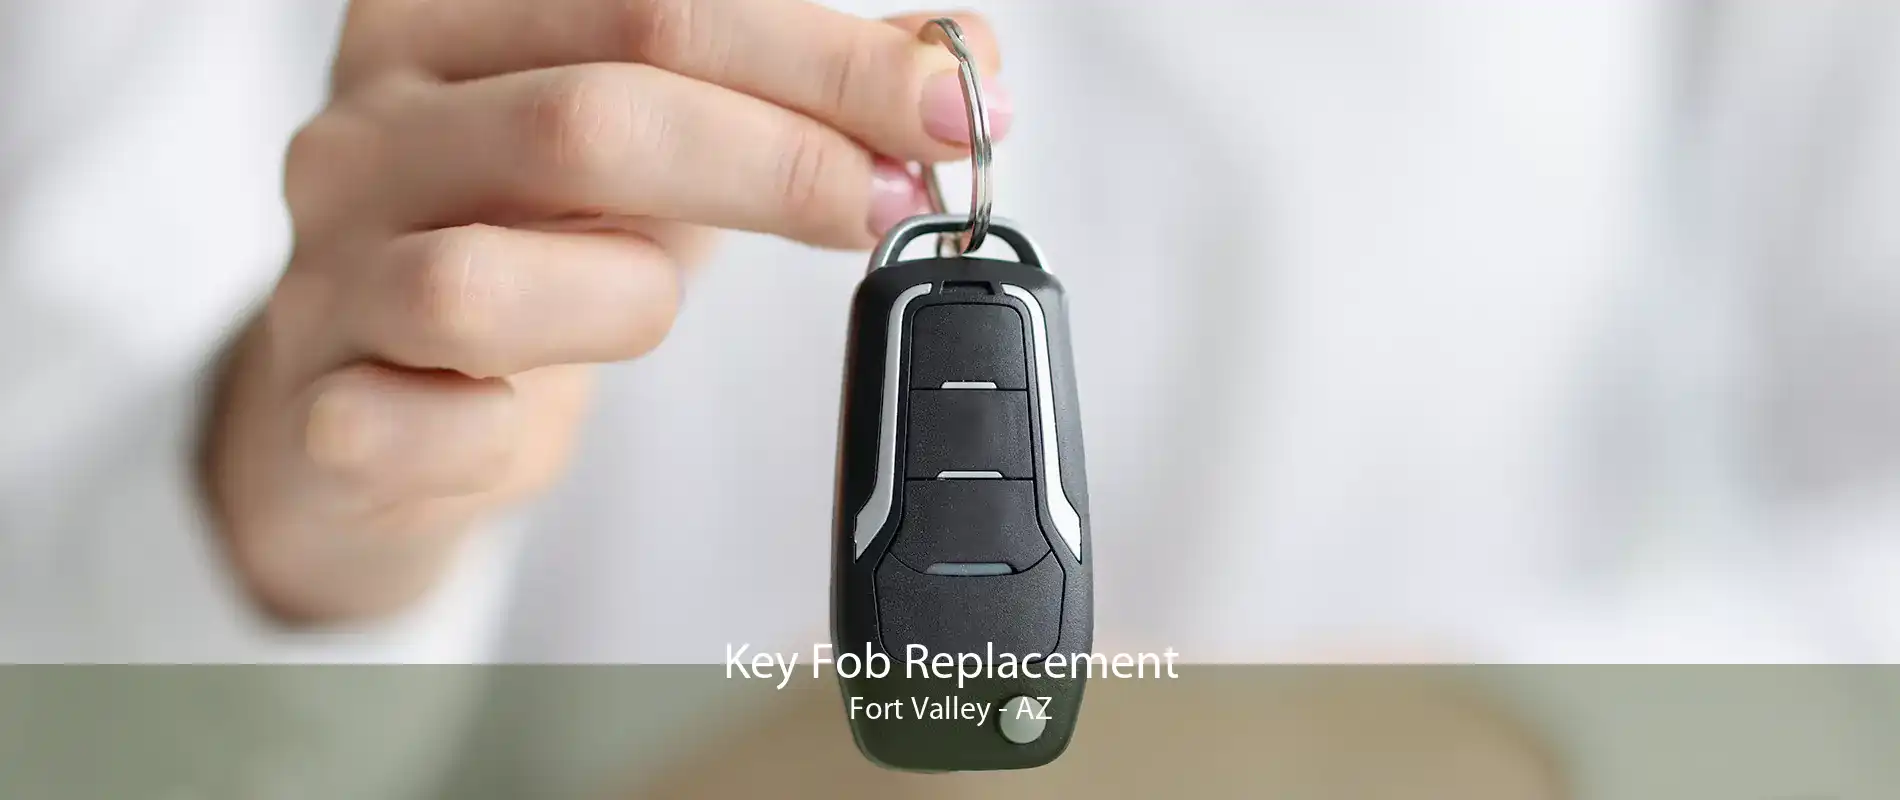 Key Fob Replacement Fort Valley - AZ